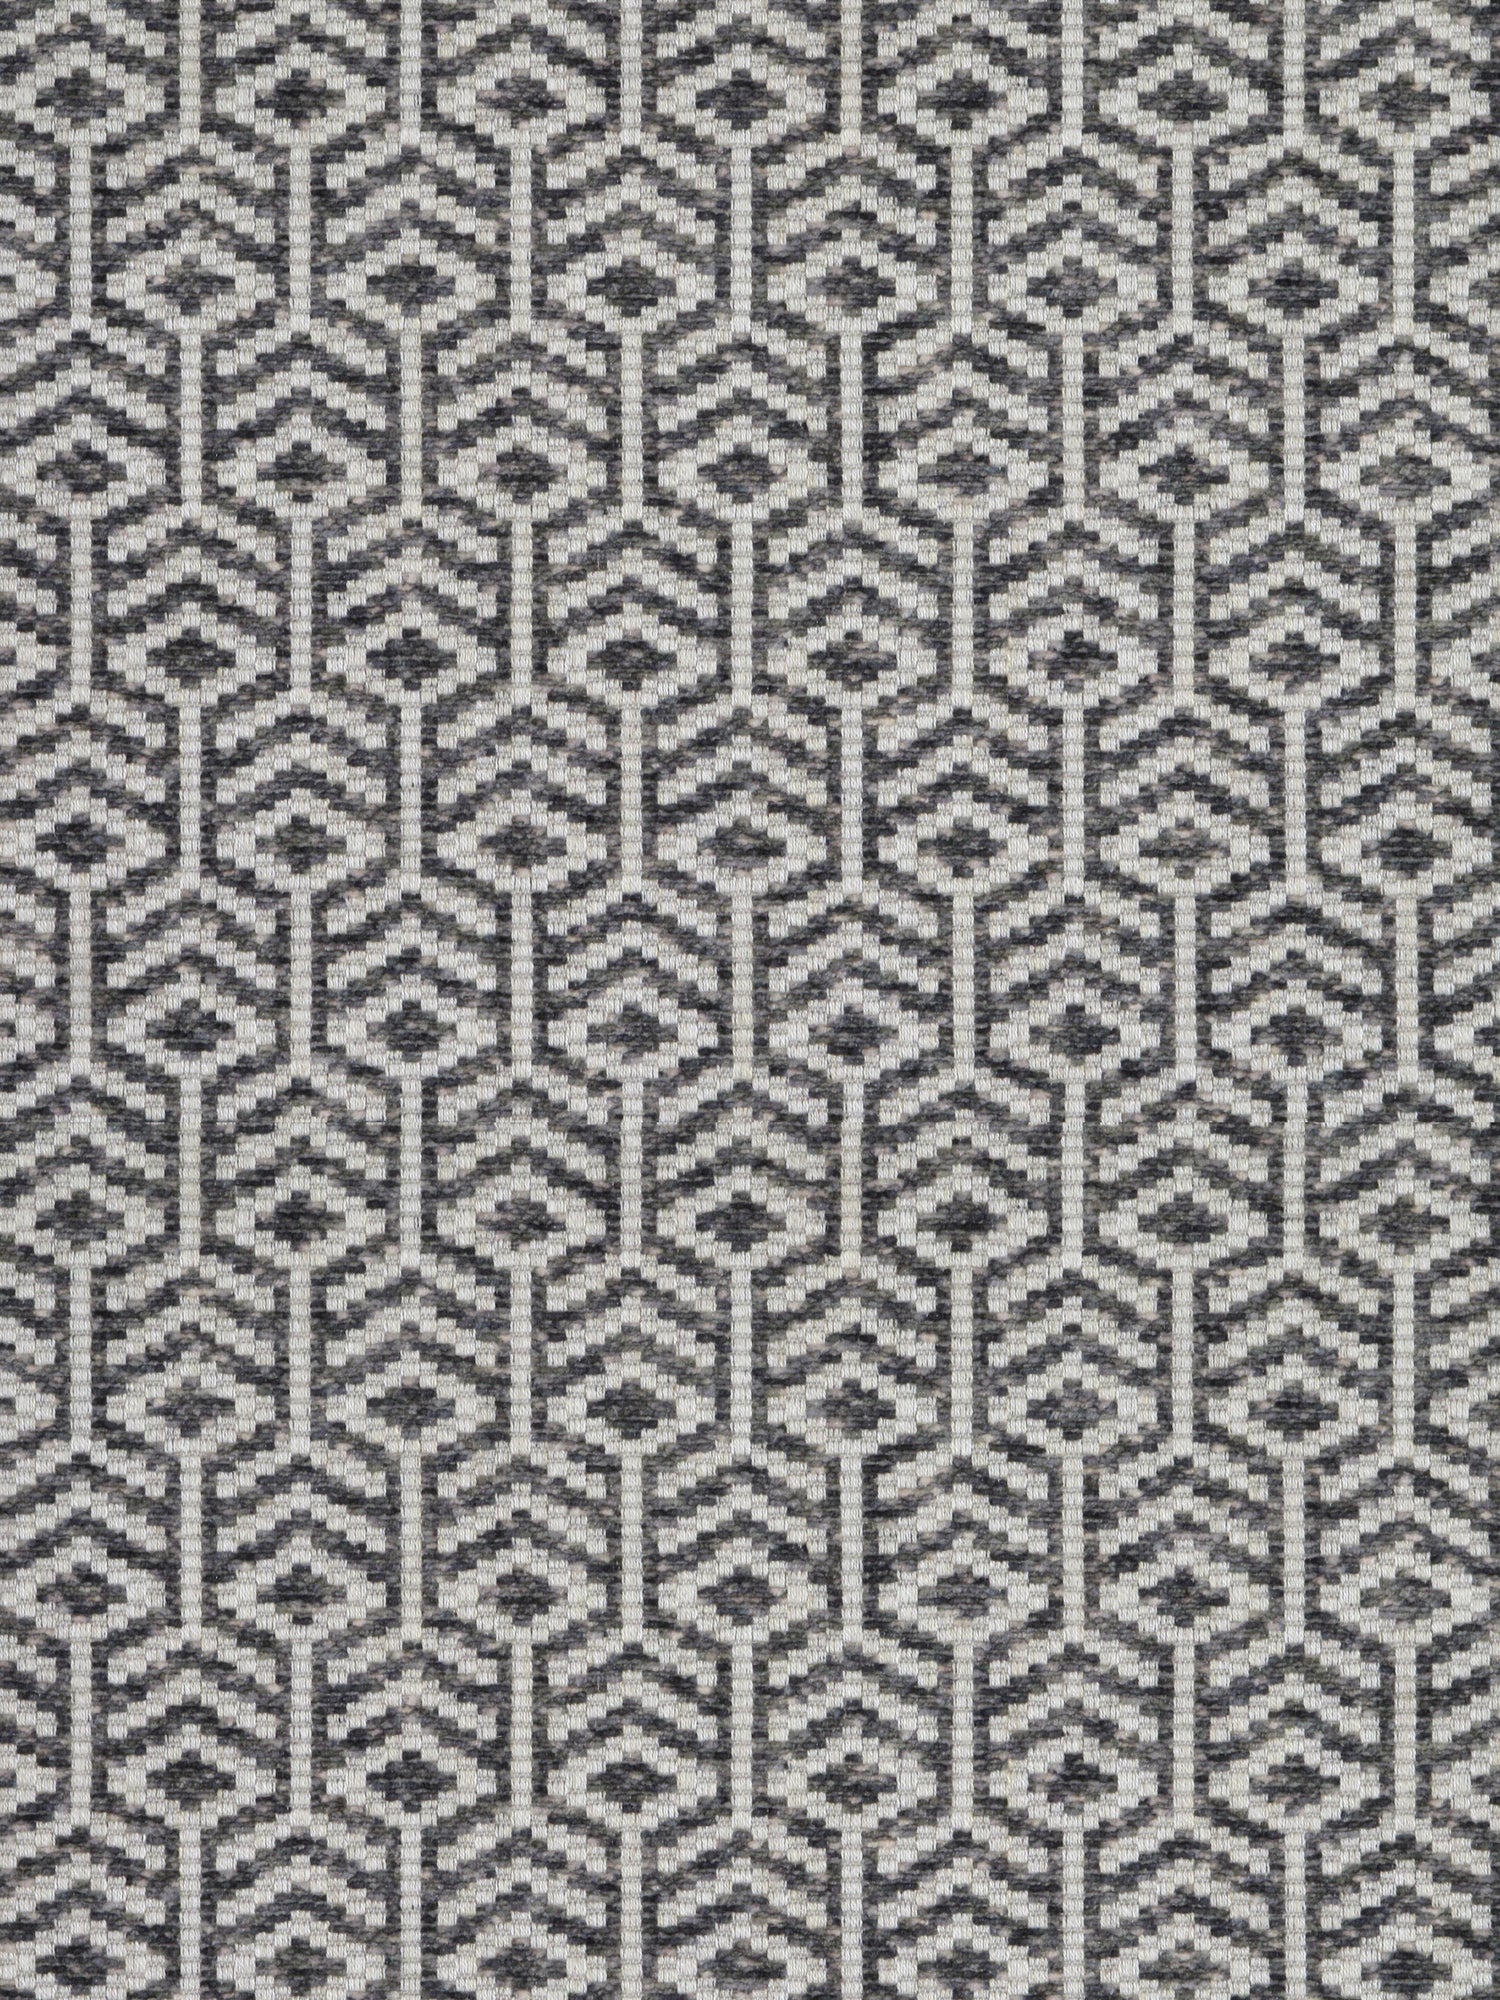 Axial fabric in pewter color - pattern number FO 00011417 - by Scalamandre in the Old World Weavers collection